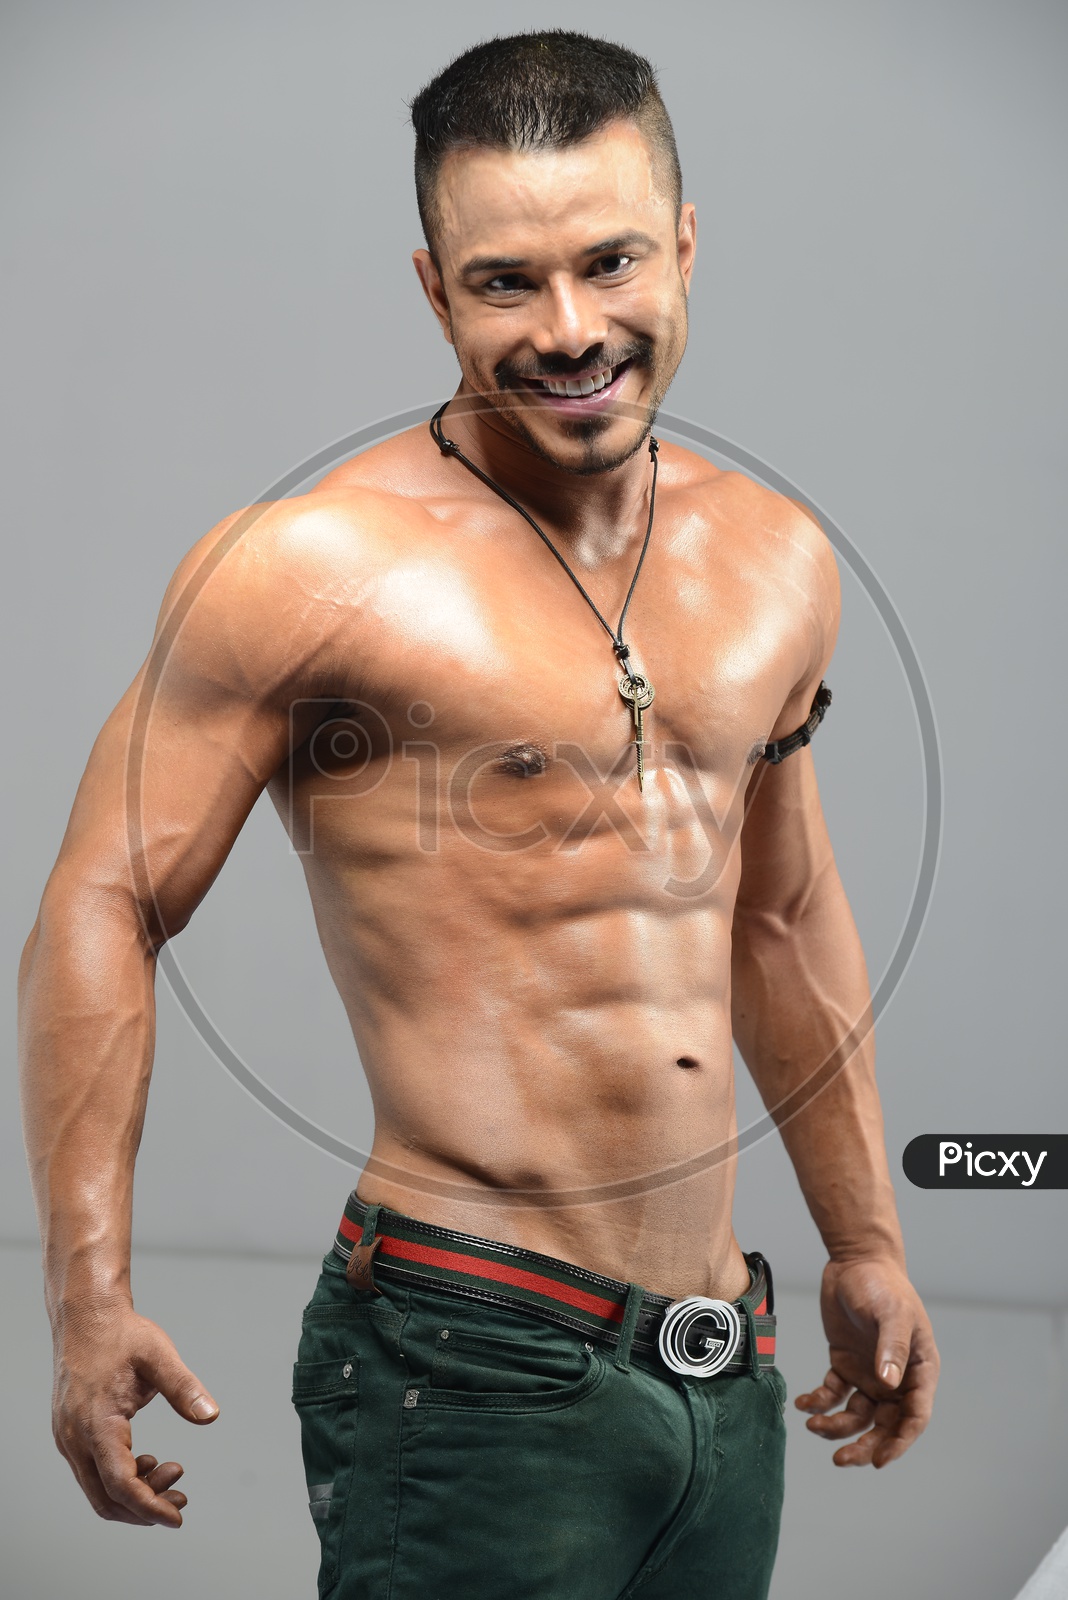 Indian Young Male with Six Pack